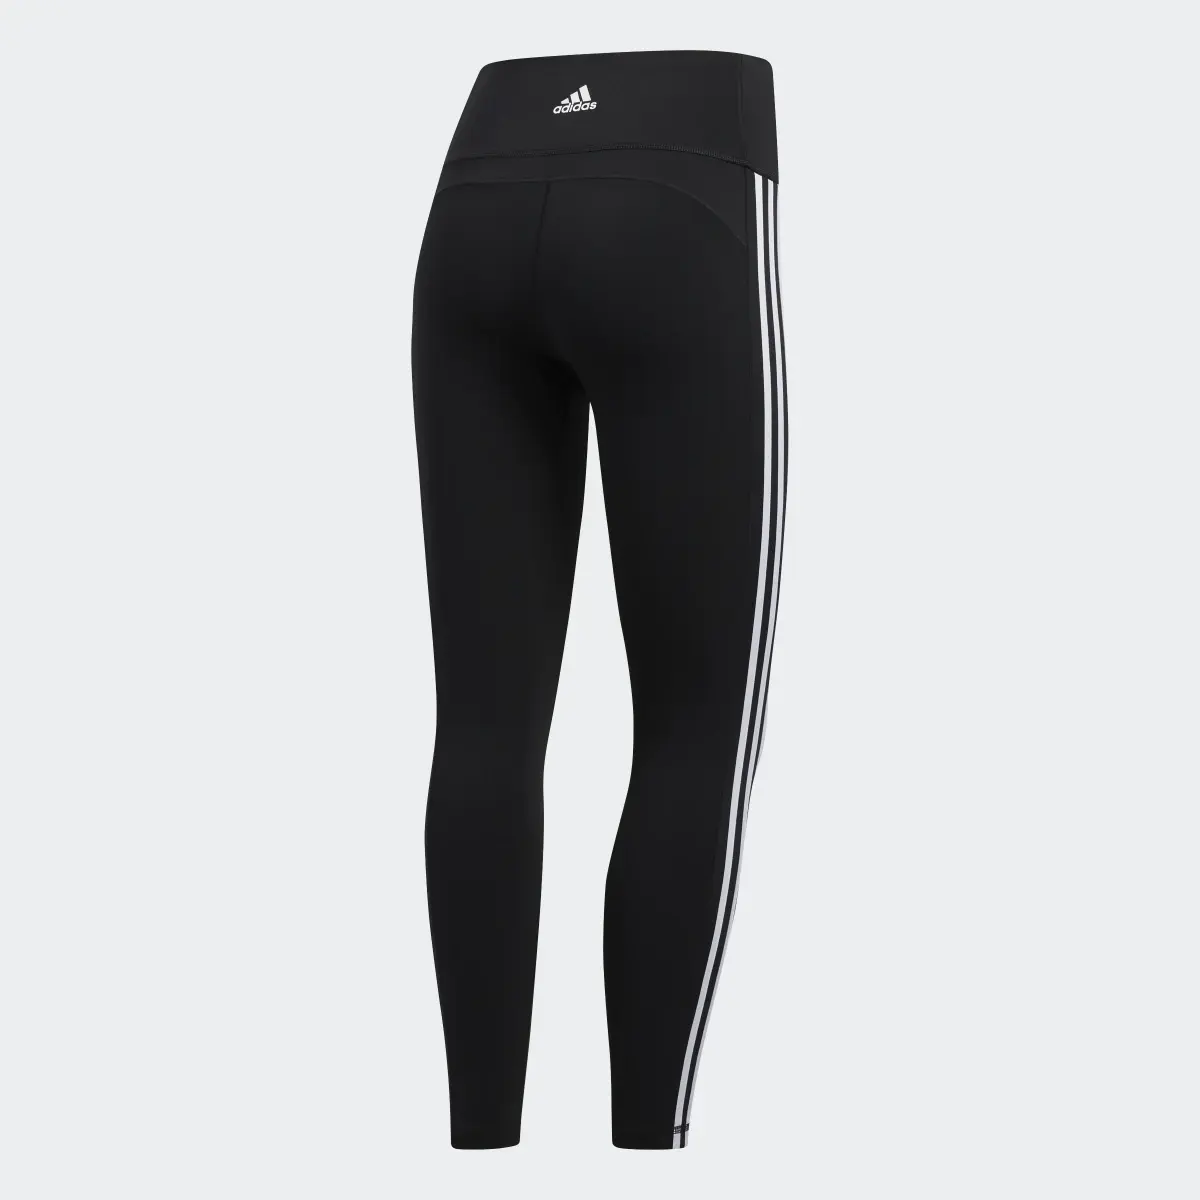 Adidas Believe This 2.0 3-Stripes 7/8 Tights. 2